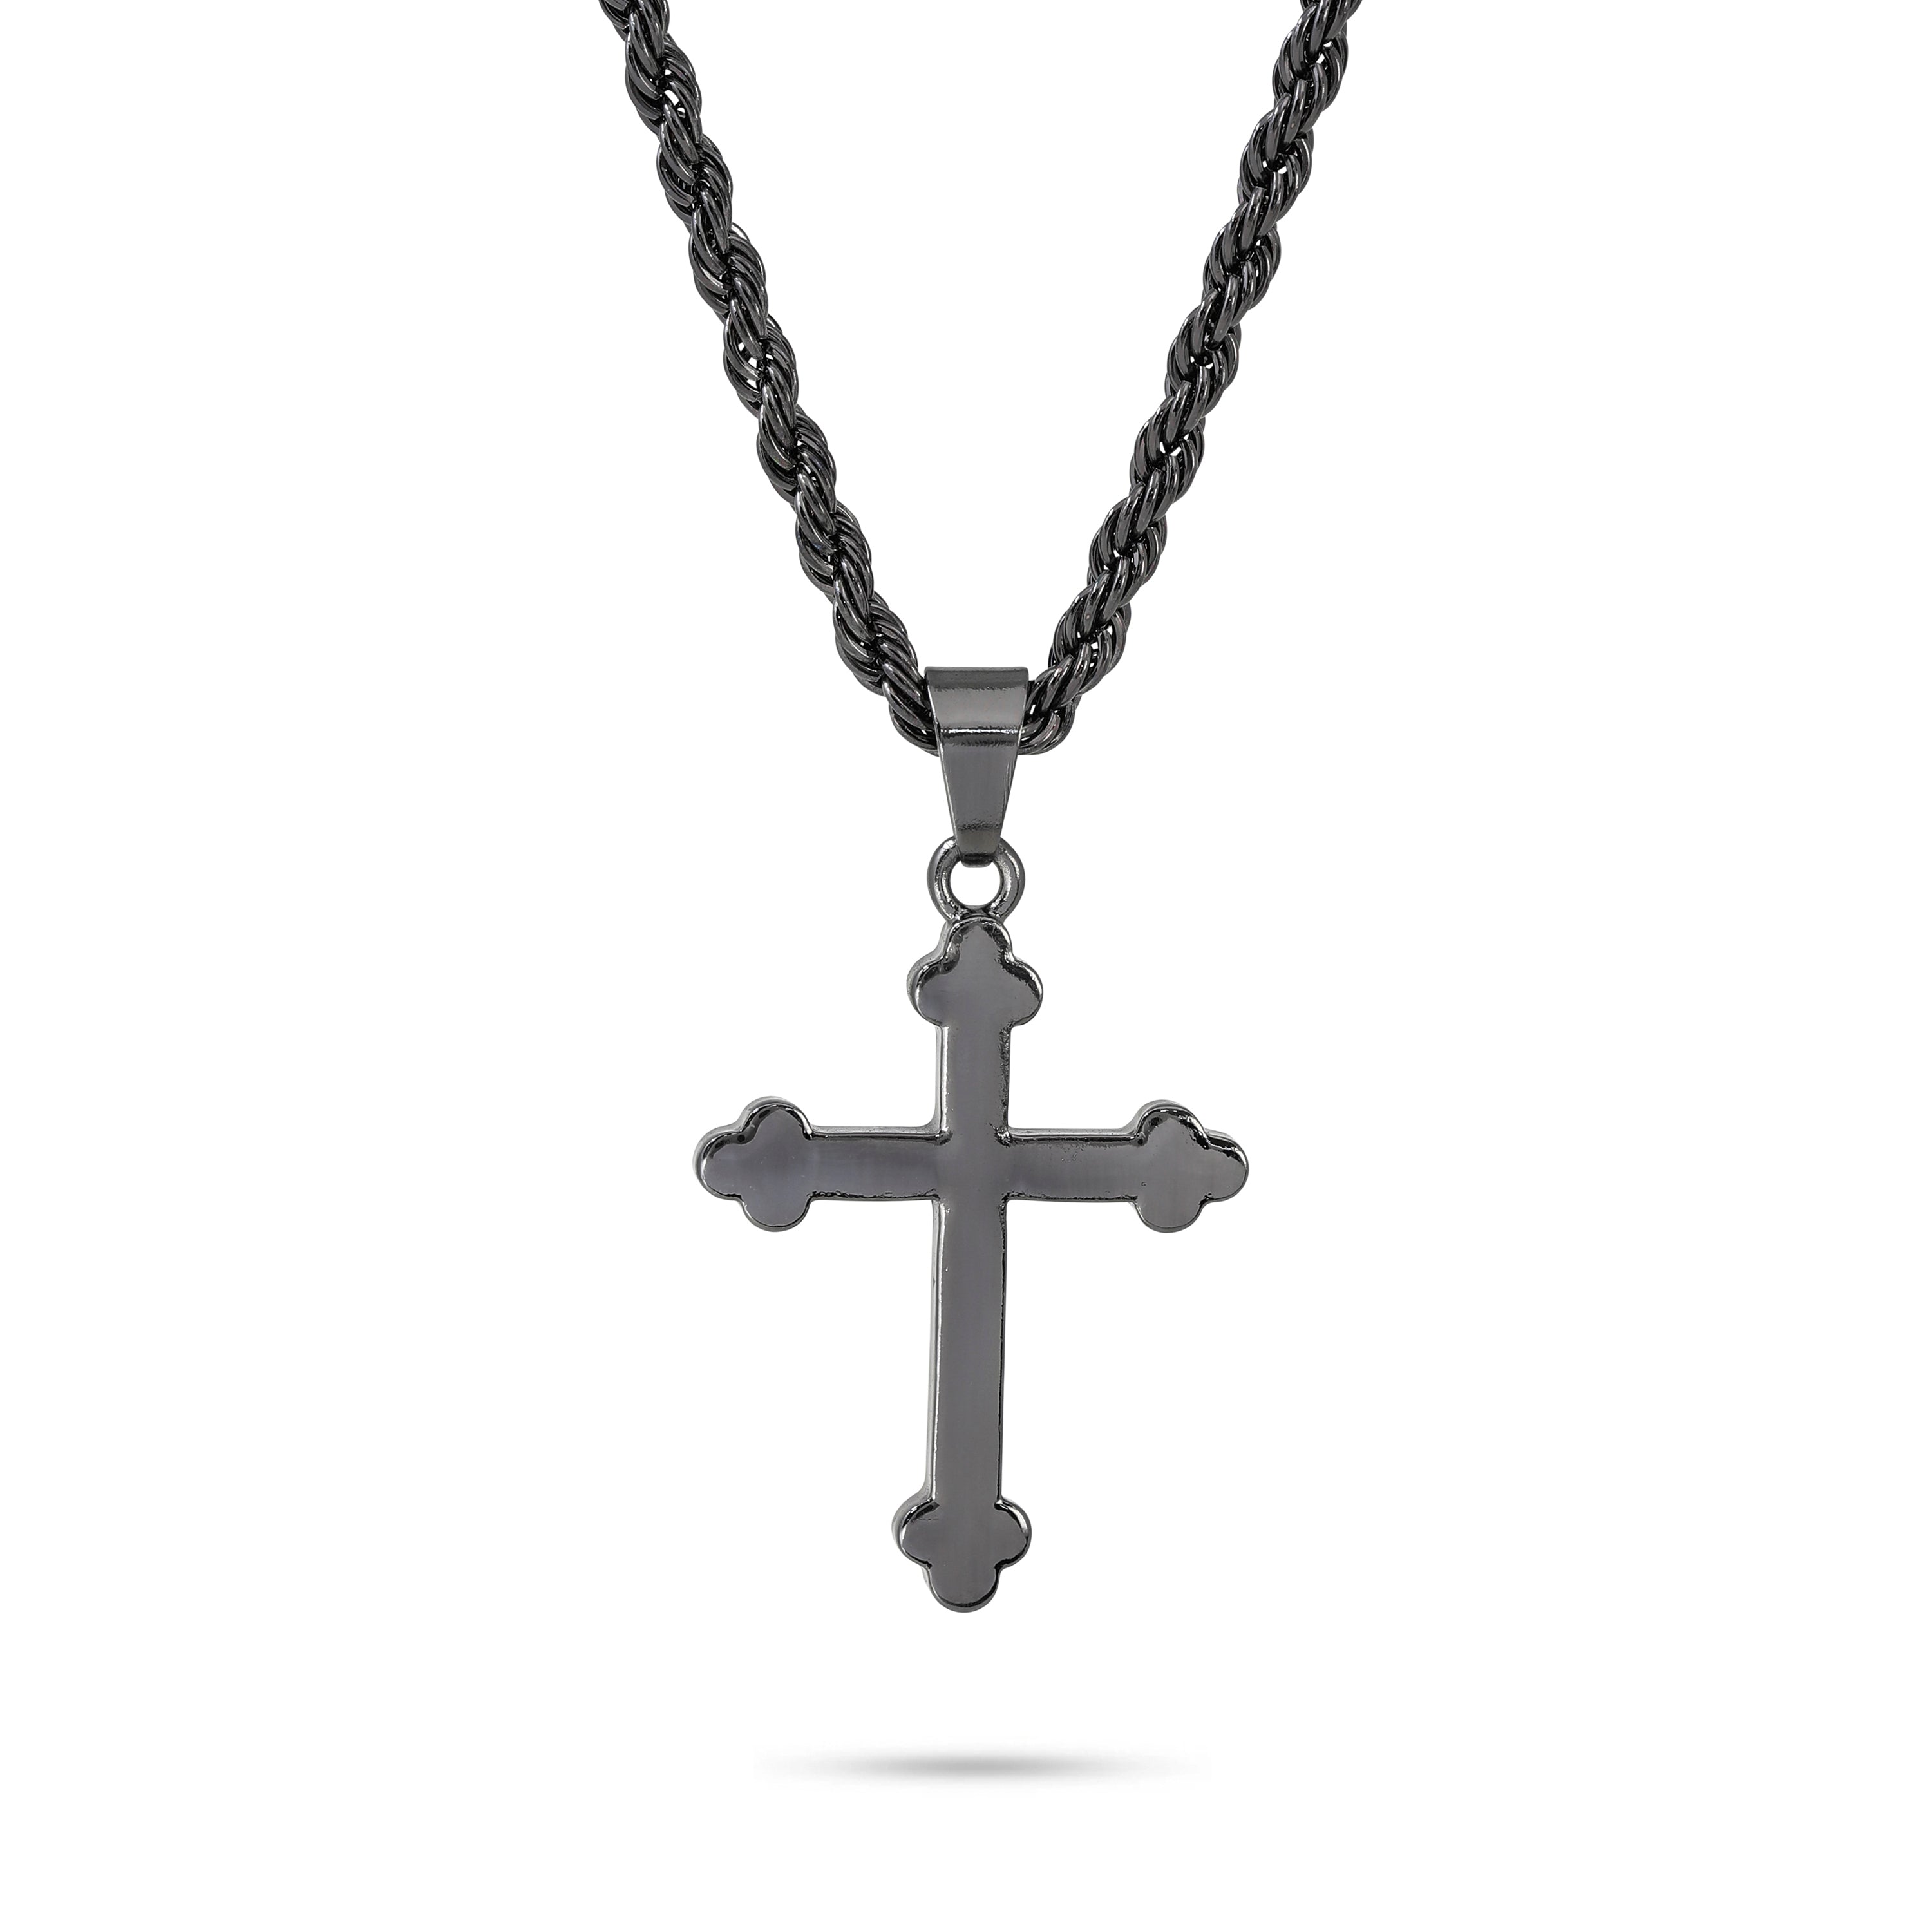 3 Nail Cross Necklace, Black | Get Real Conferences